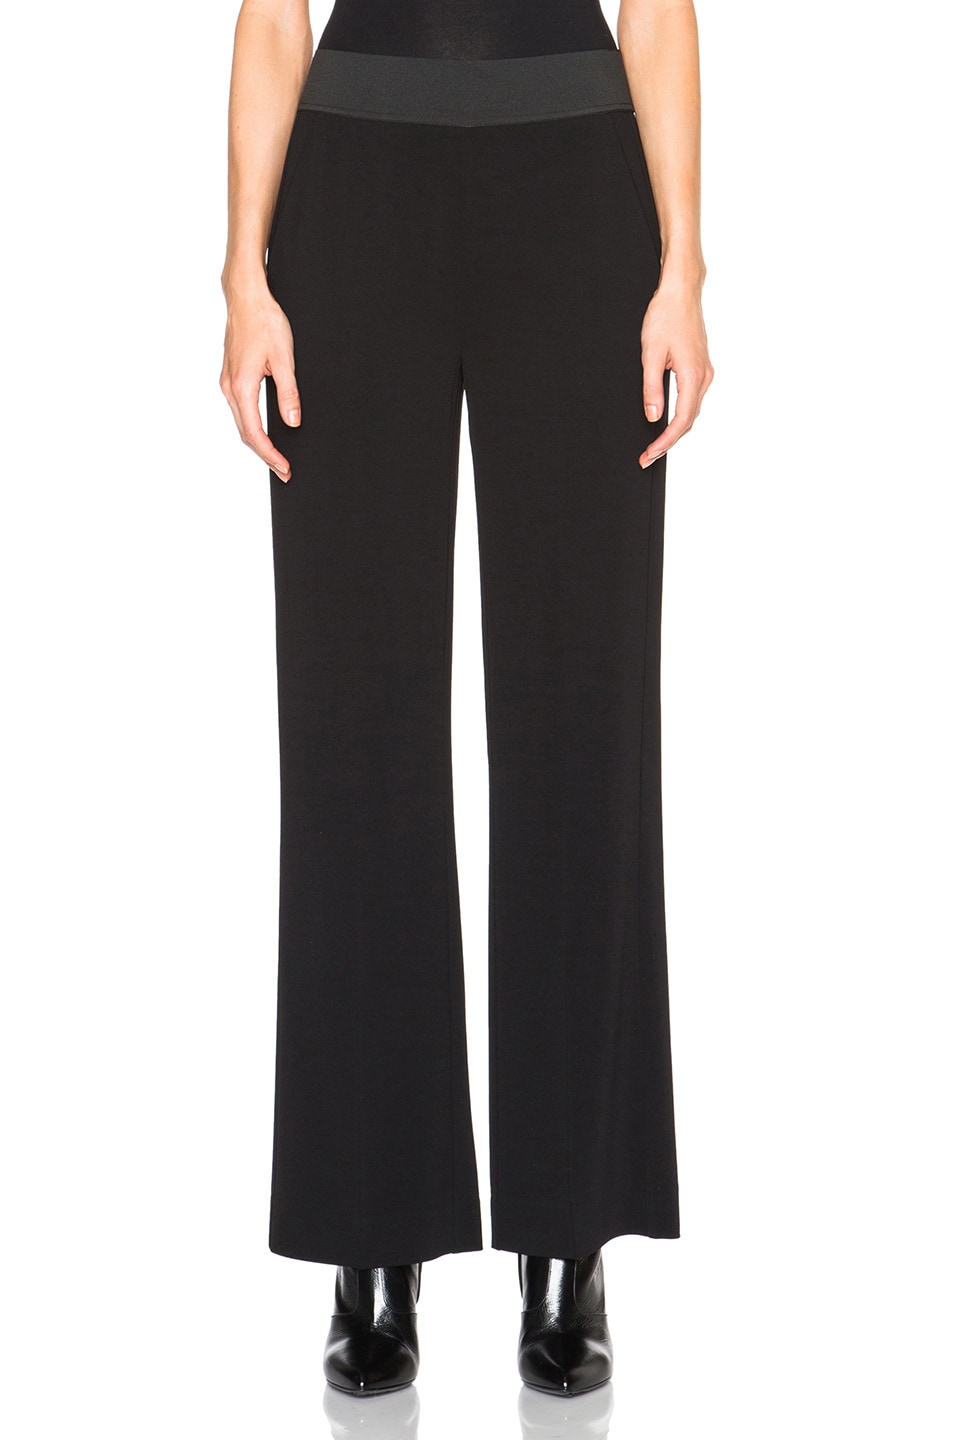 Image 1 of James Perse LIMITED Elastic Waist Pants in Black